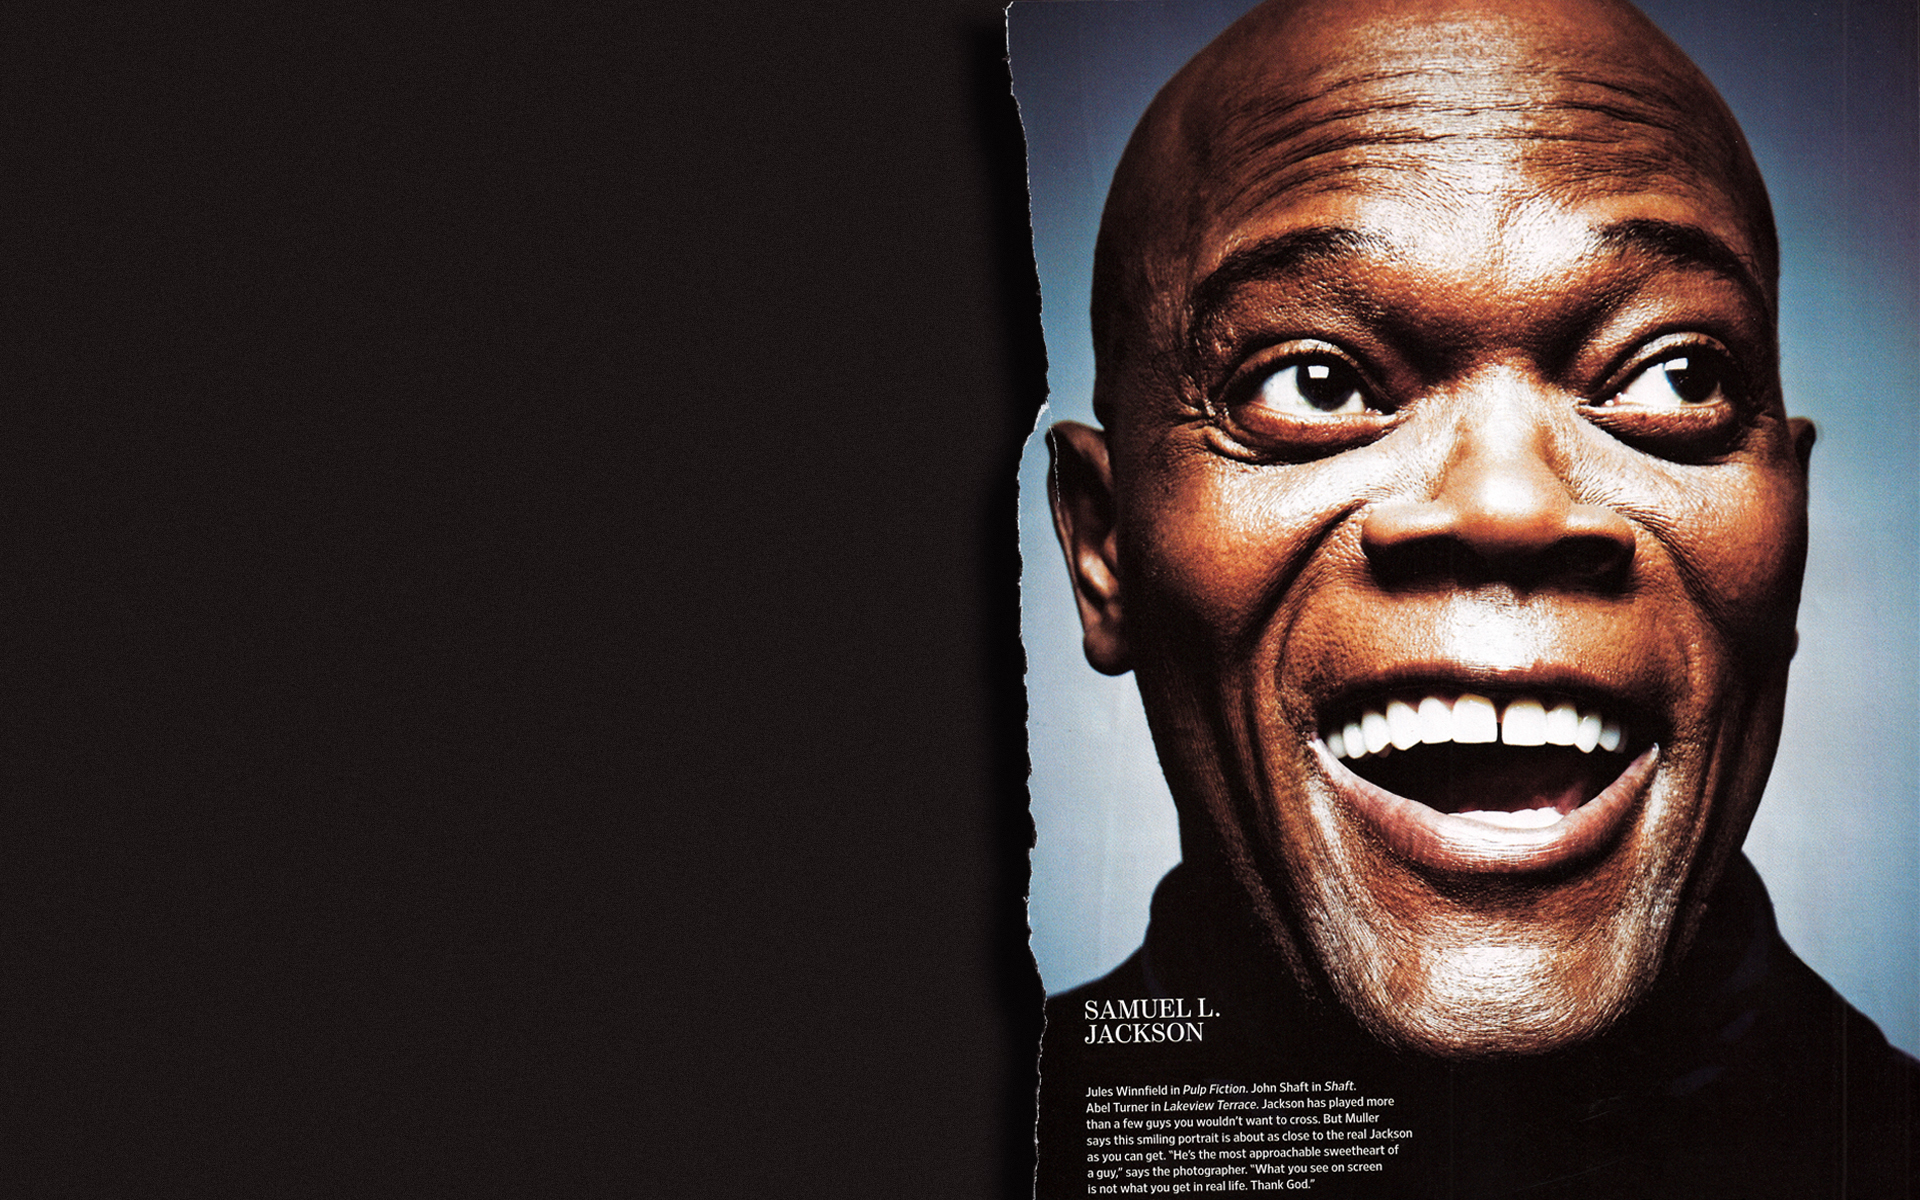 HD desktop wallpaper featuring a close-up of a smiling Samuel L. Jackson against a dark background.